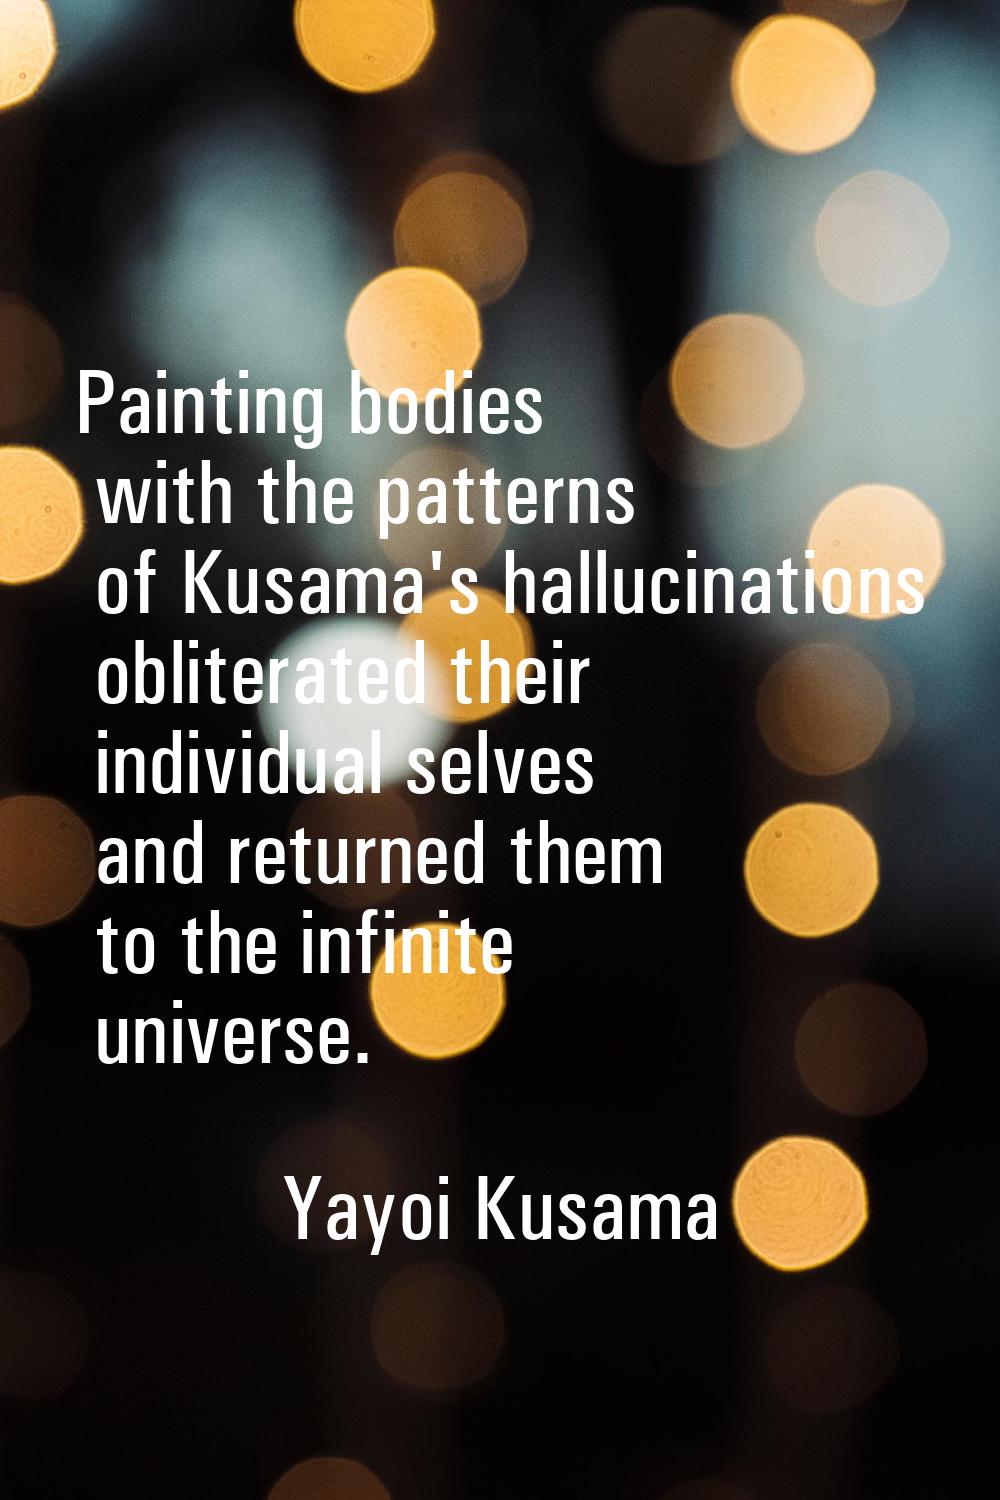 Painting bodies with the patterns of Kusama's hallucinations obliterated their individual selves an